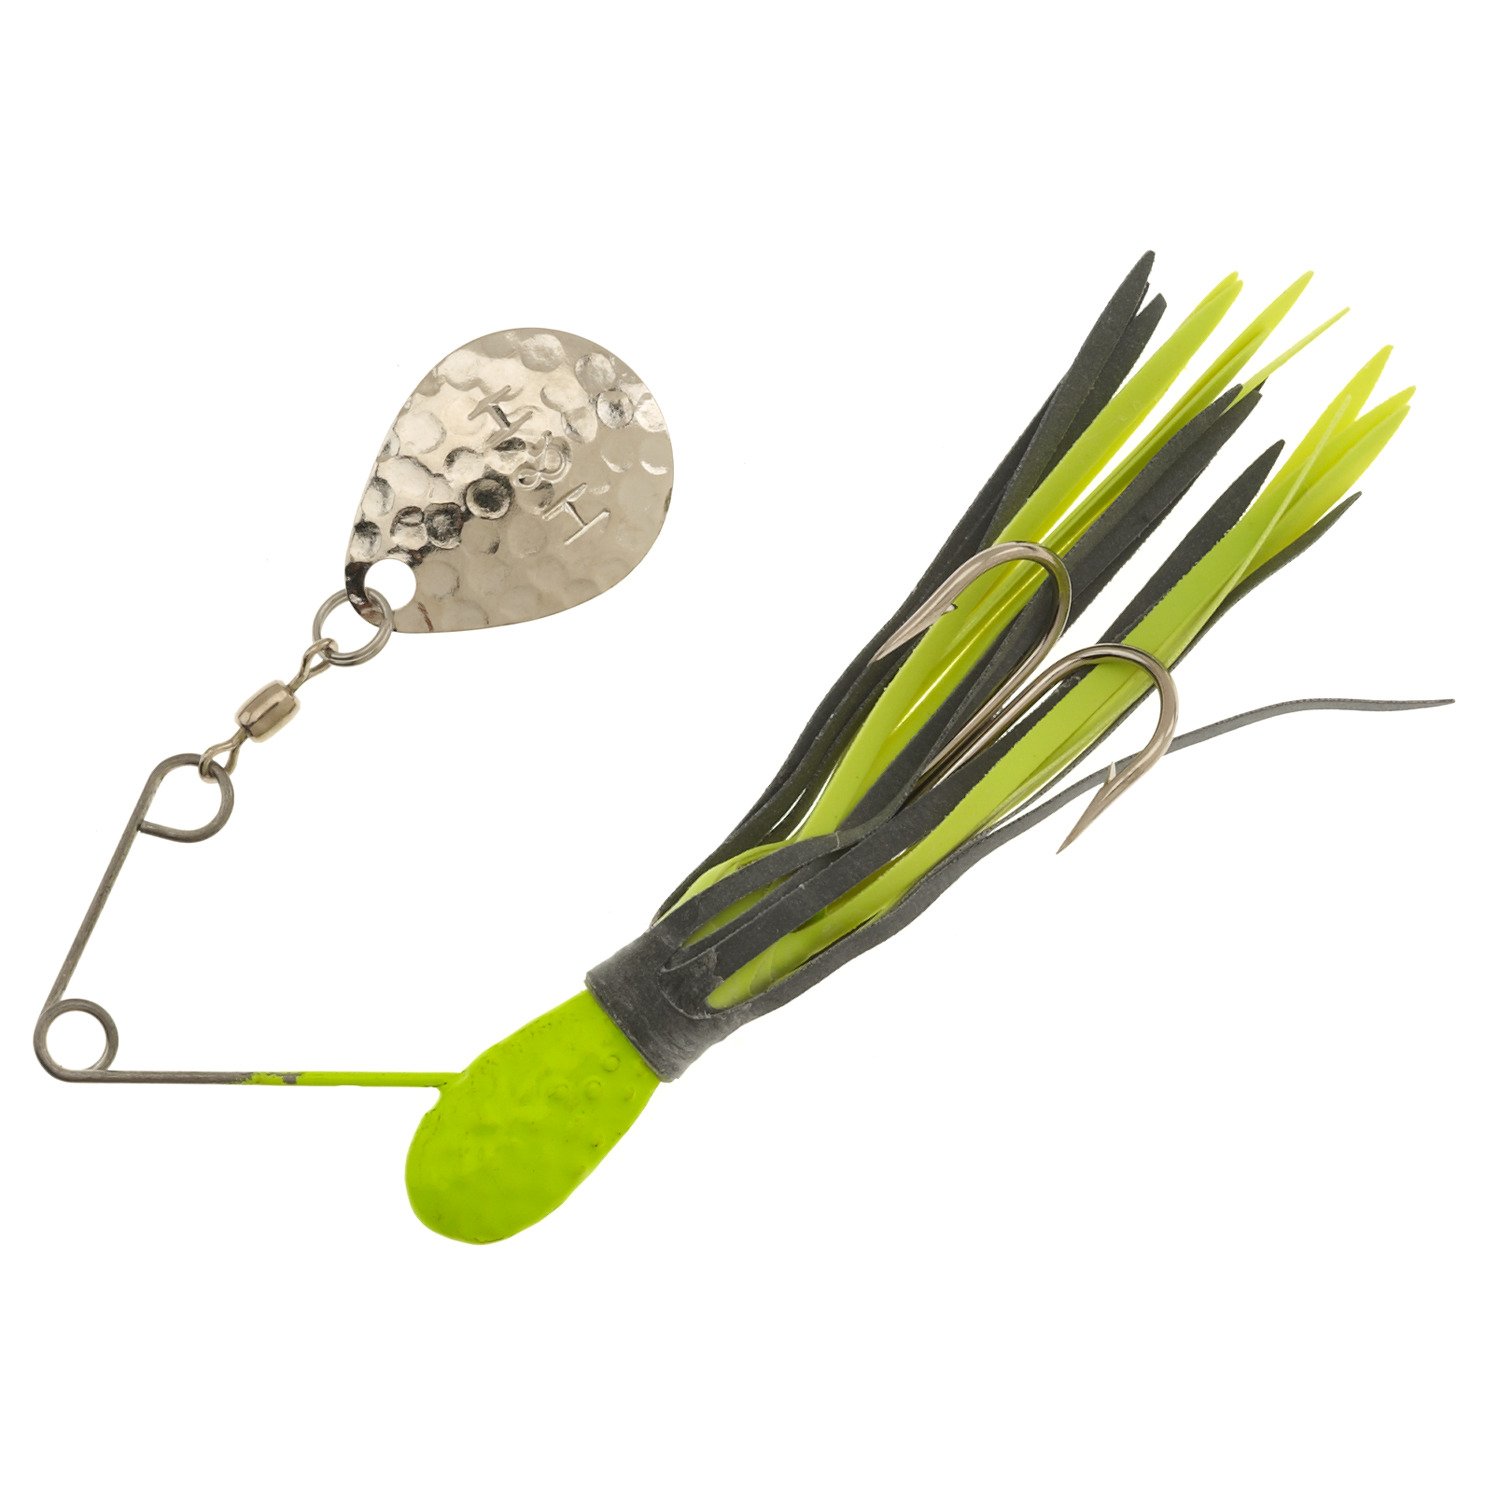  The Original H&H Double Spinner Lure Spinner Baits